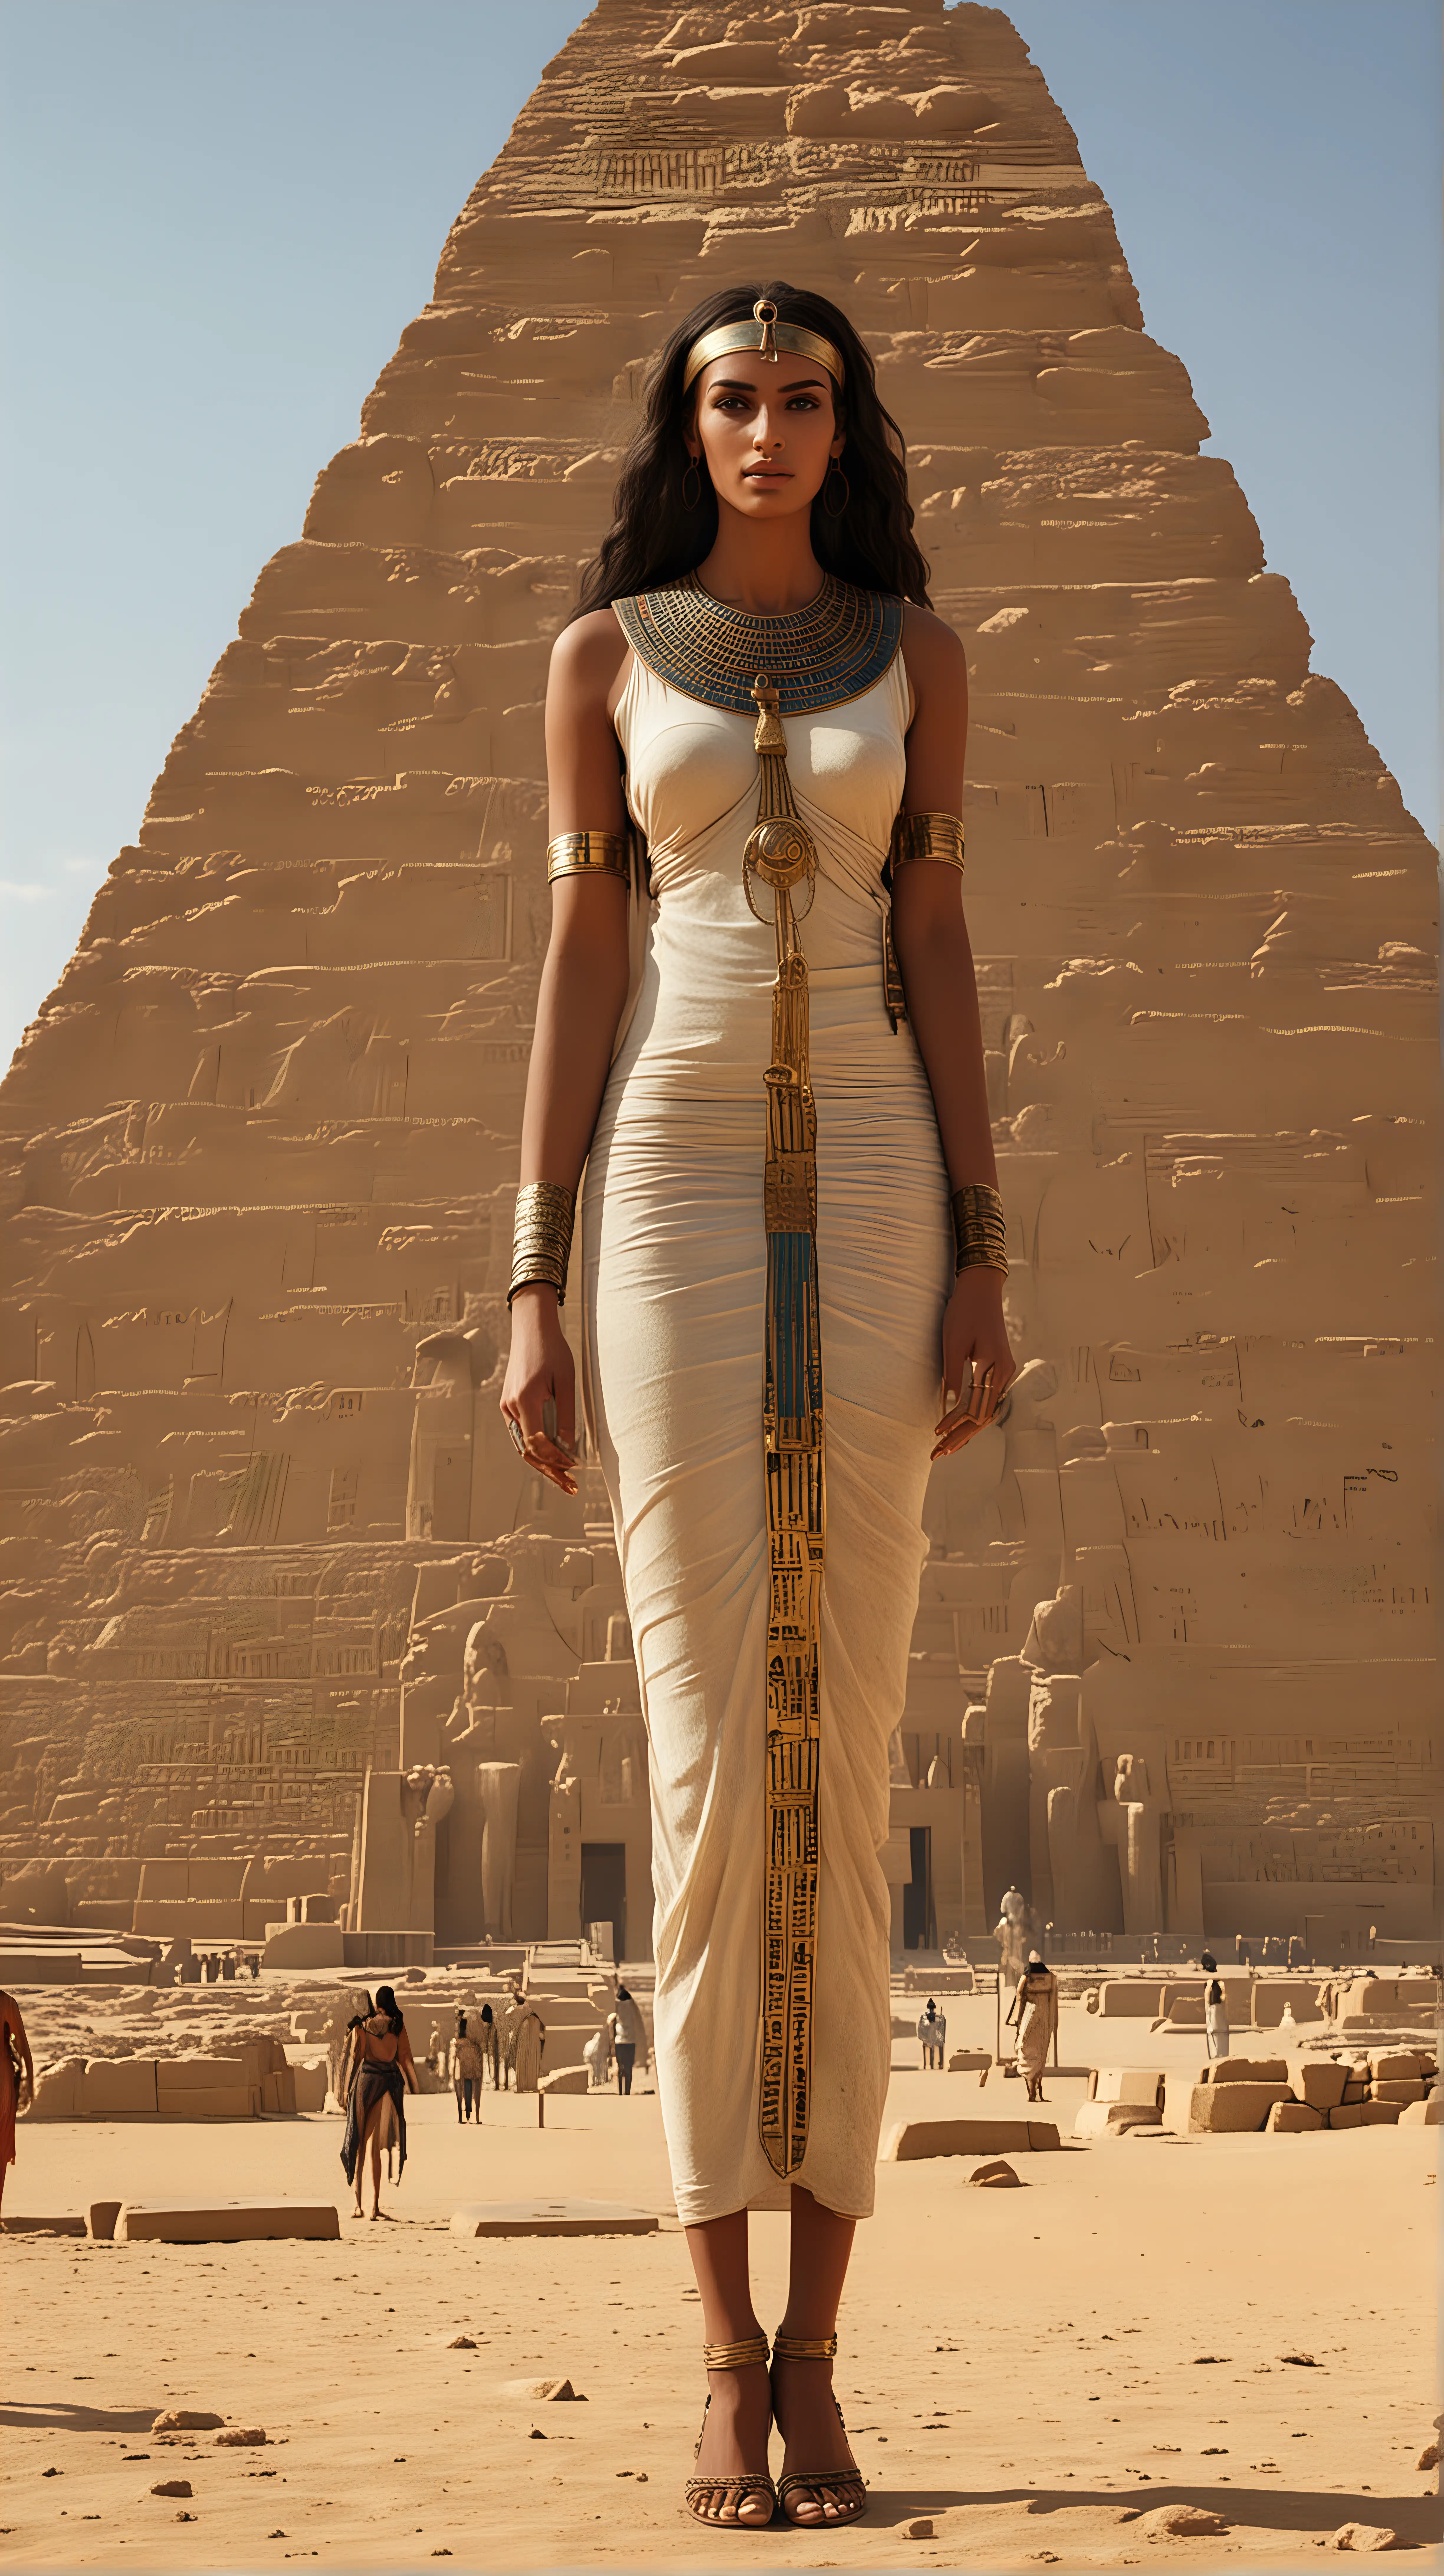 Godlike Ancient Egyptian Woman with Exaggerated Height near Pyramid